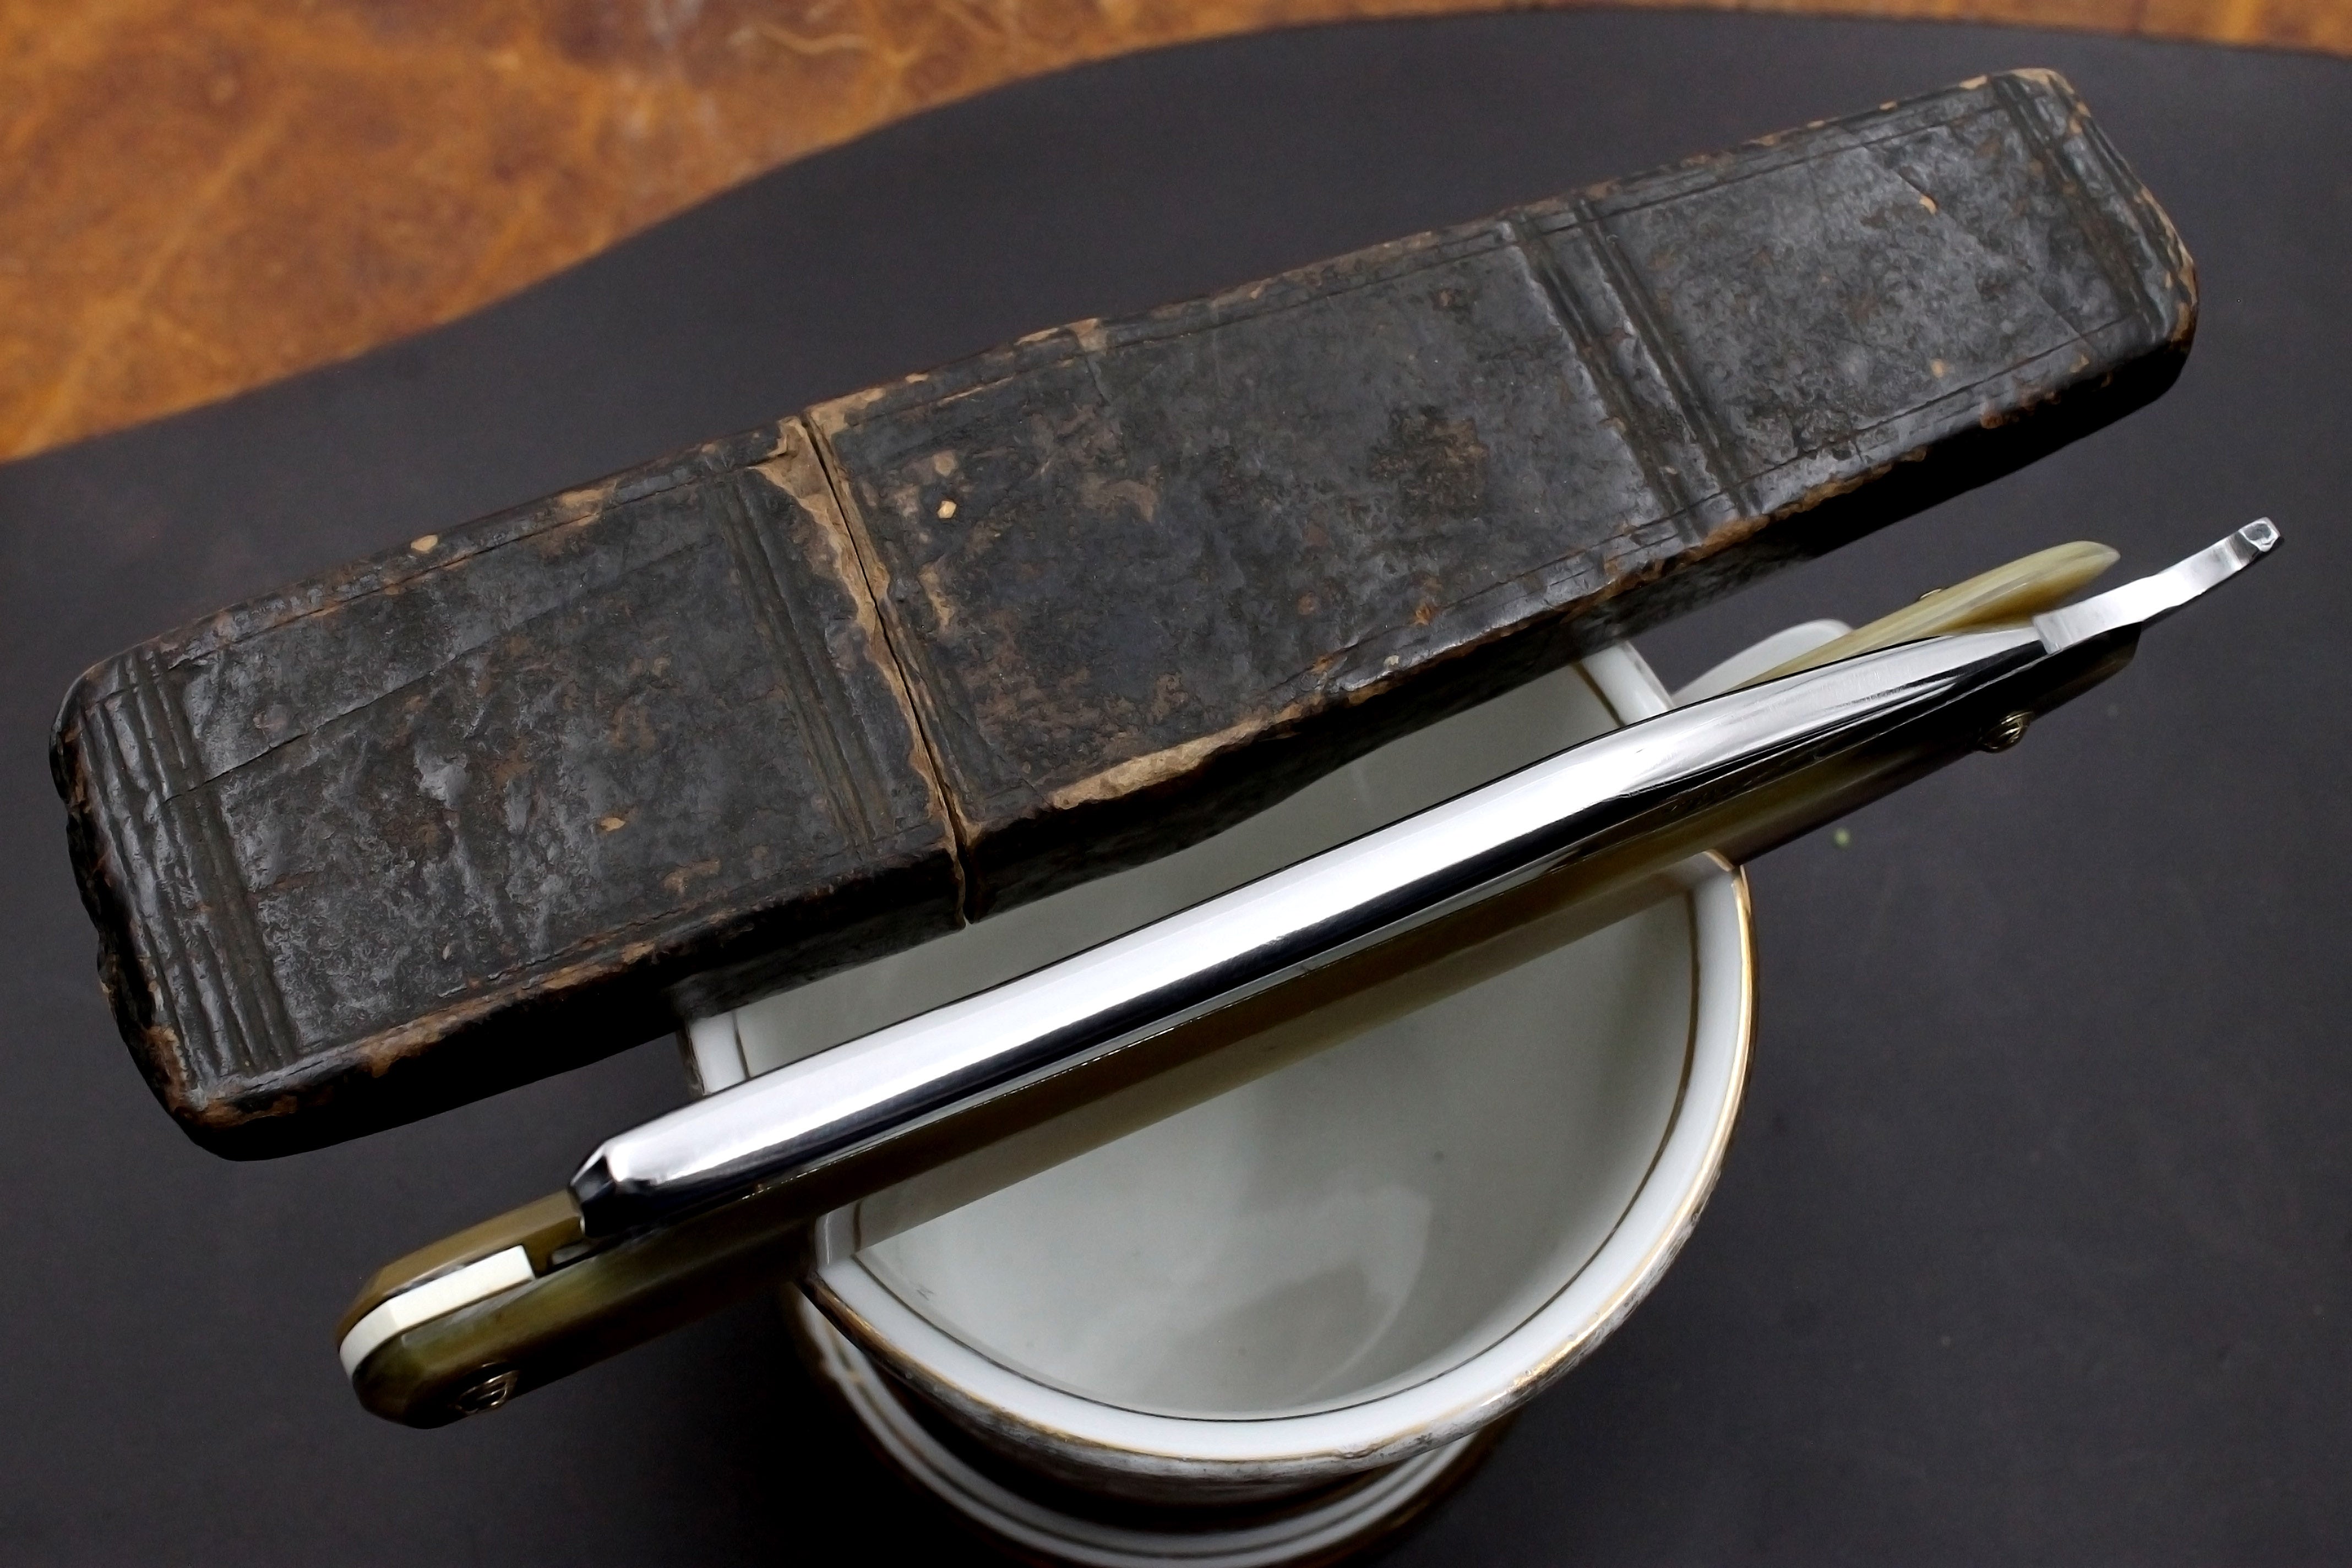 Southern & Richardson 1" 8/8 - Vintage Sheffield Straight Razor with Custom Horn Scales - Shave Ready